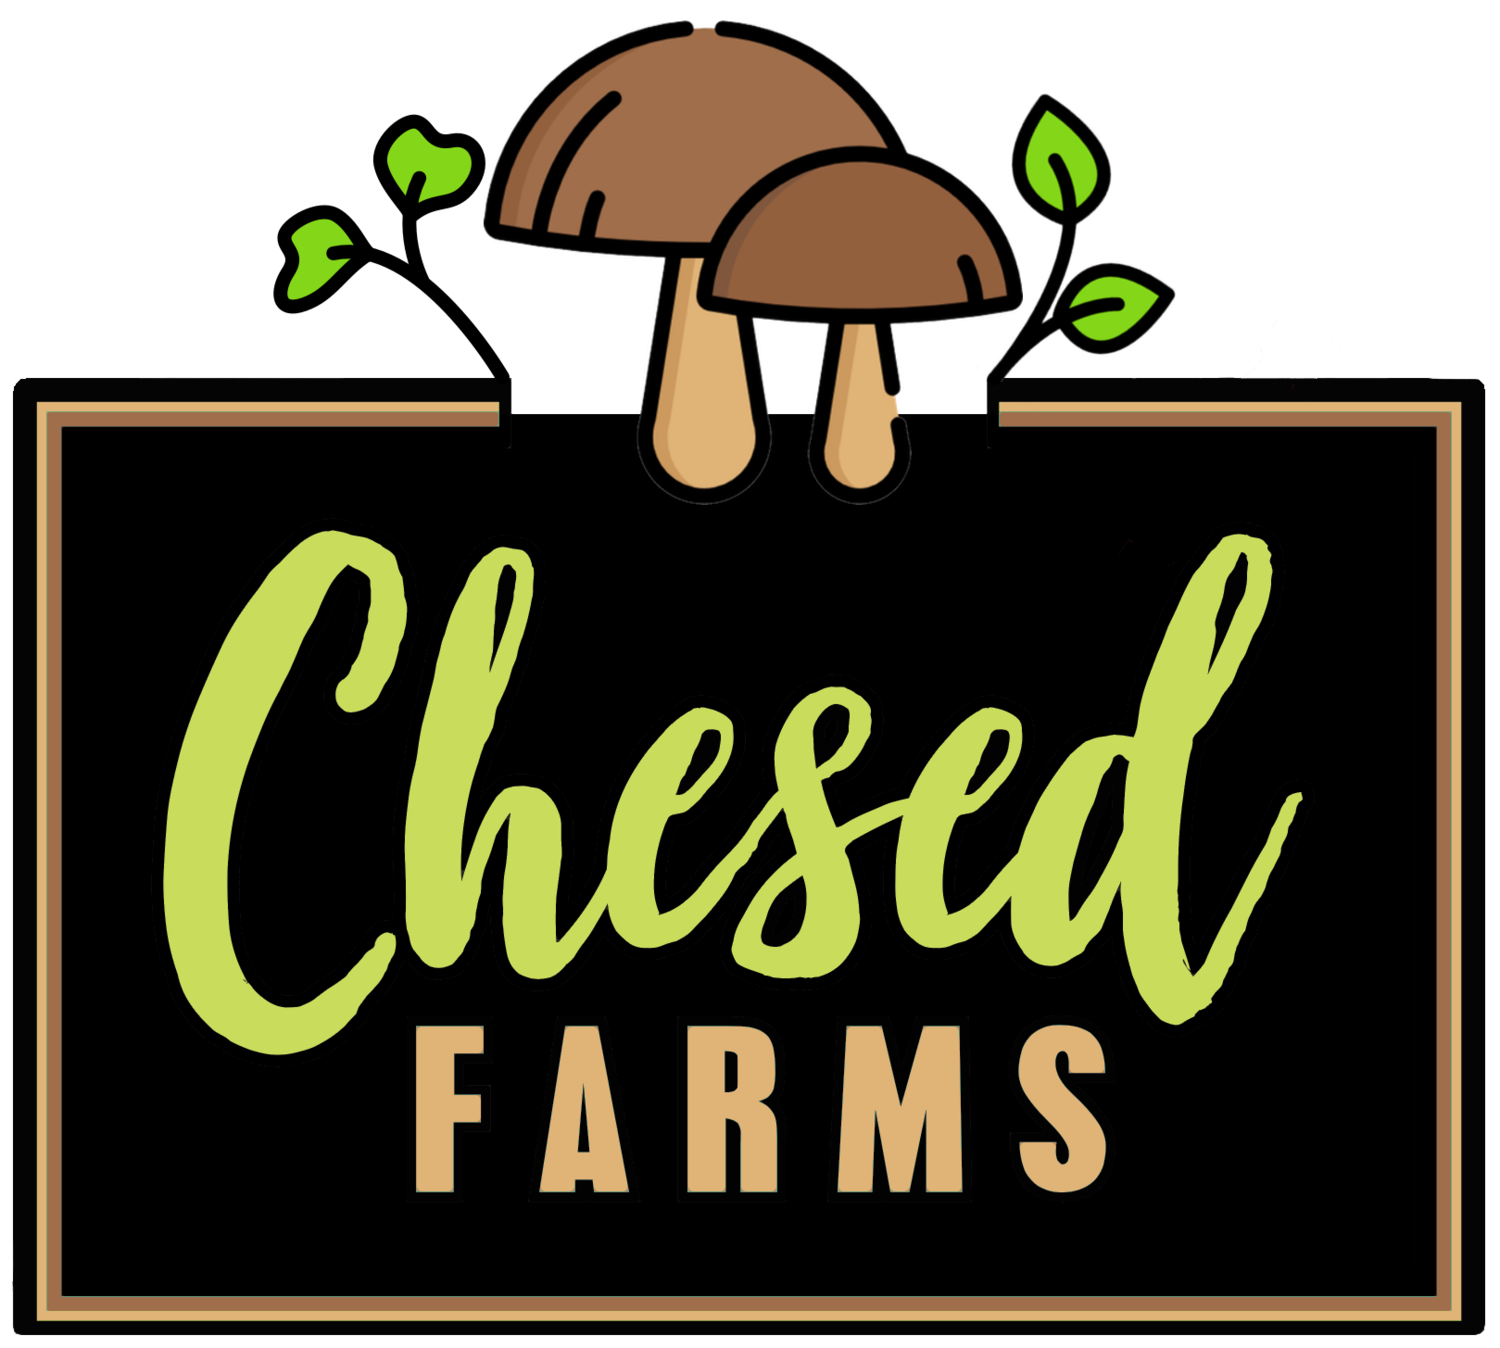 Chesed Farms